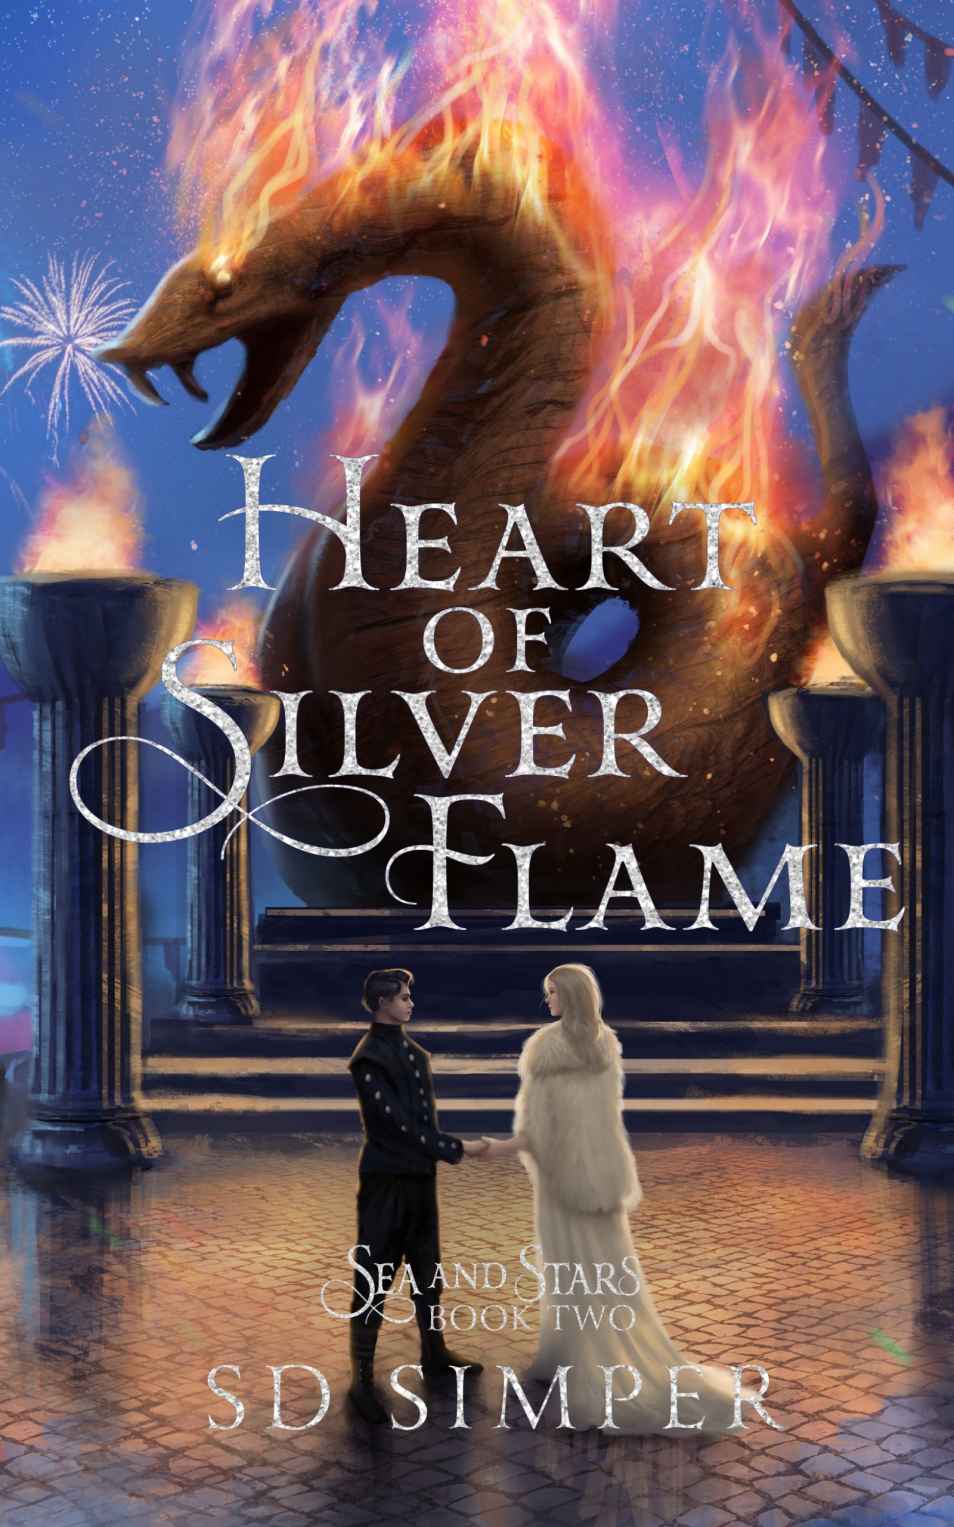 Heart of Silver Flame (Sea and Stars Book 2)